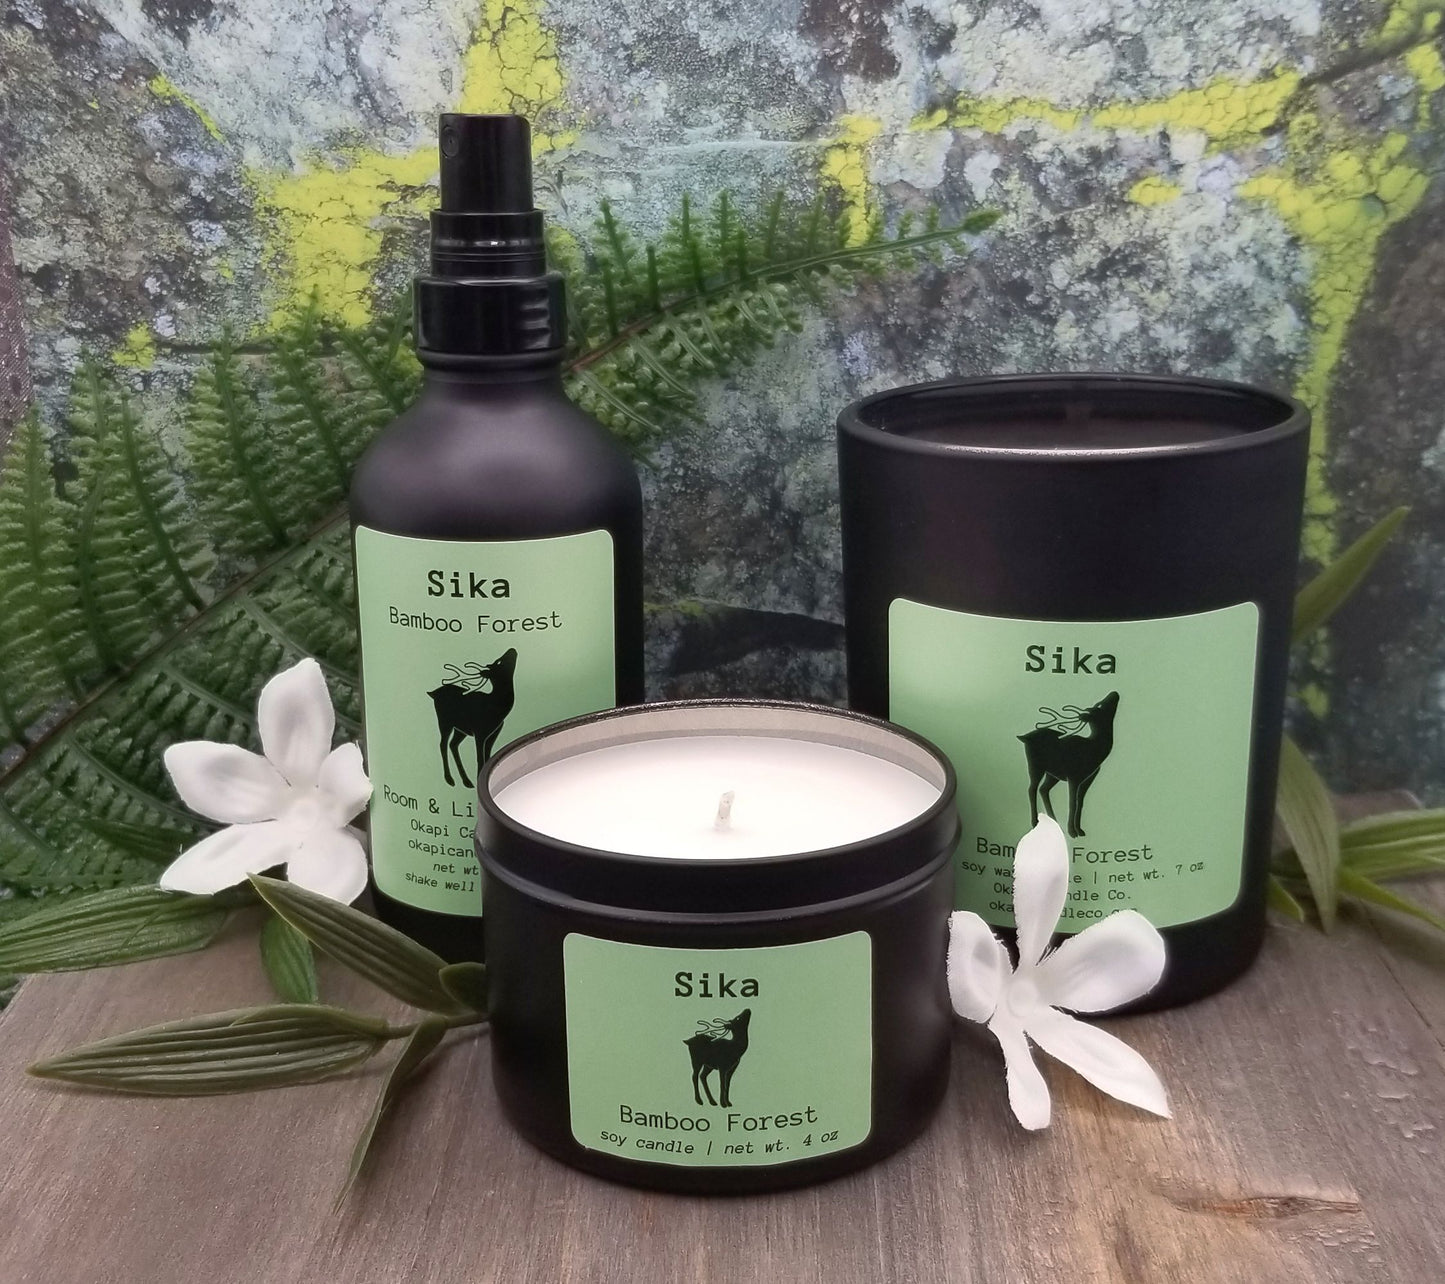 Sika Deer Soy Candle - Bamboo Forest Fragrance